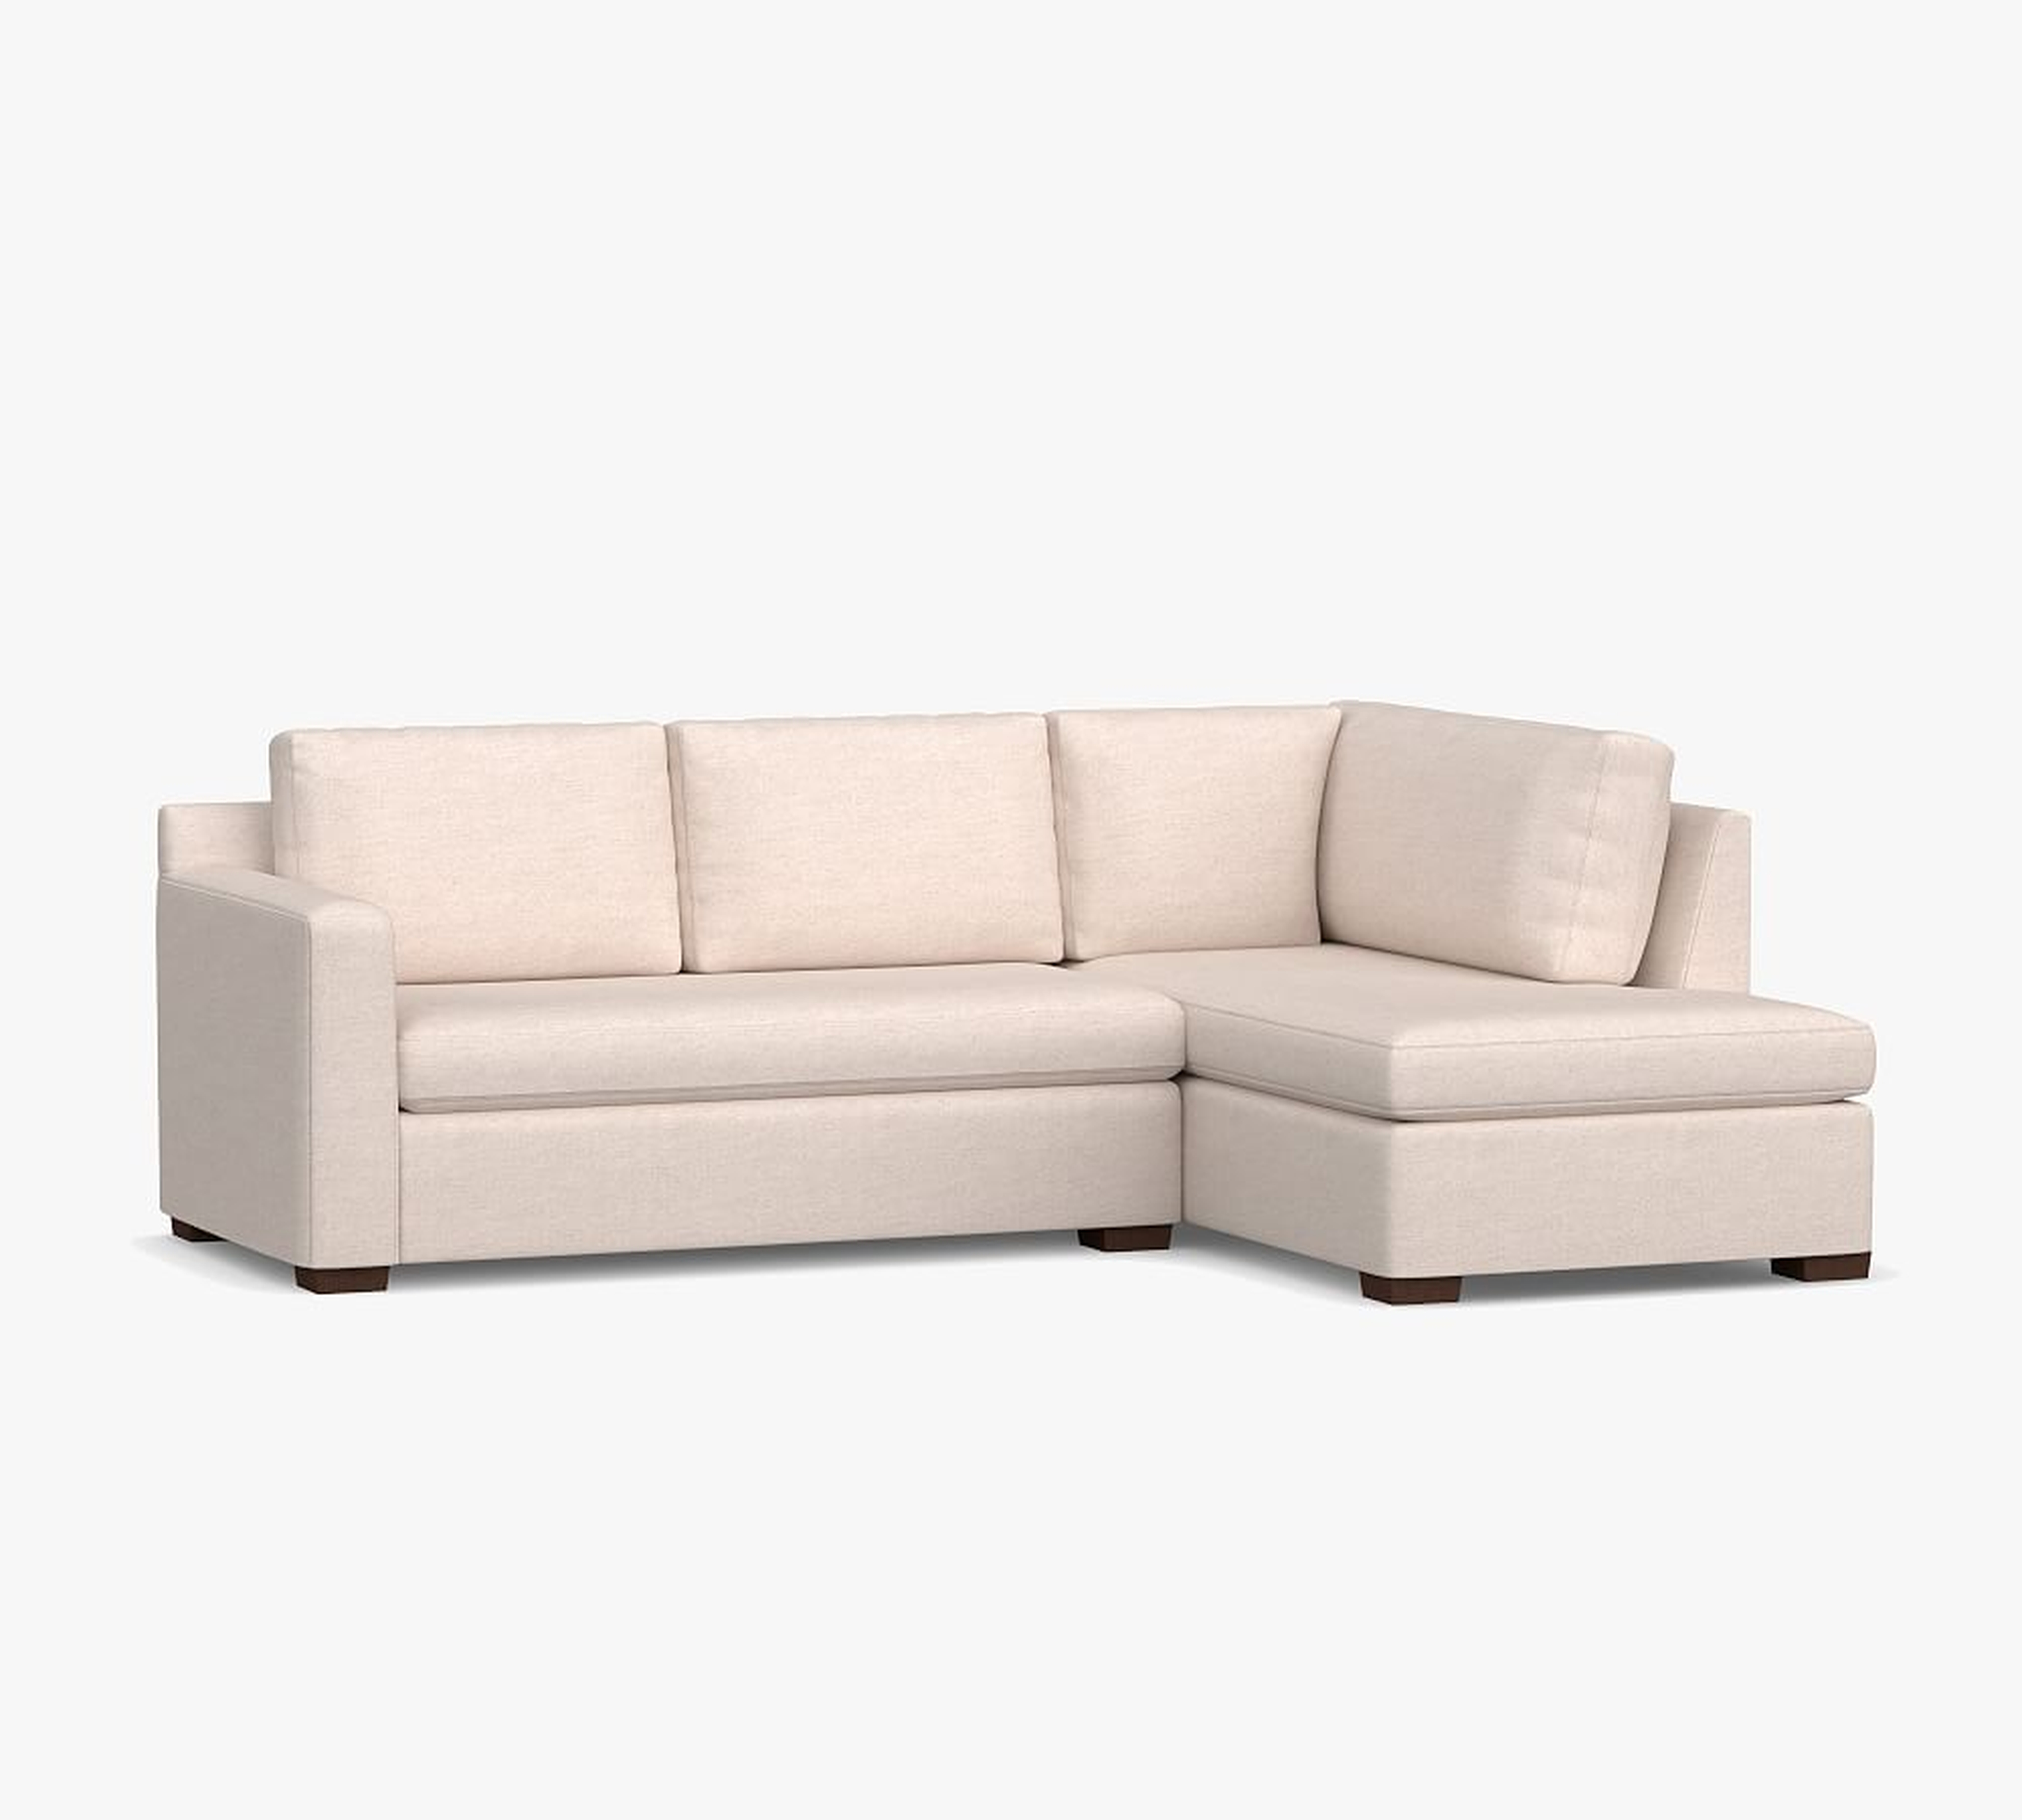 Shasta Square Arm Upholstered Left Sofa Return Bumper Sectional, Polyester Wrapped Cushions, Performance Brushed Basketweave Sand - Pottery Barn